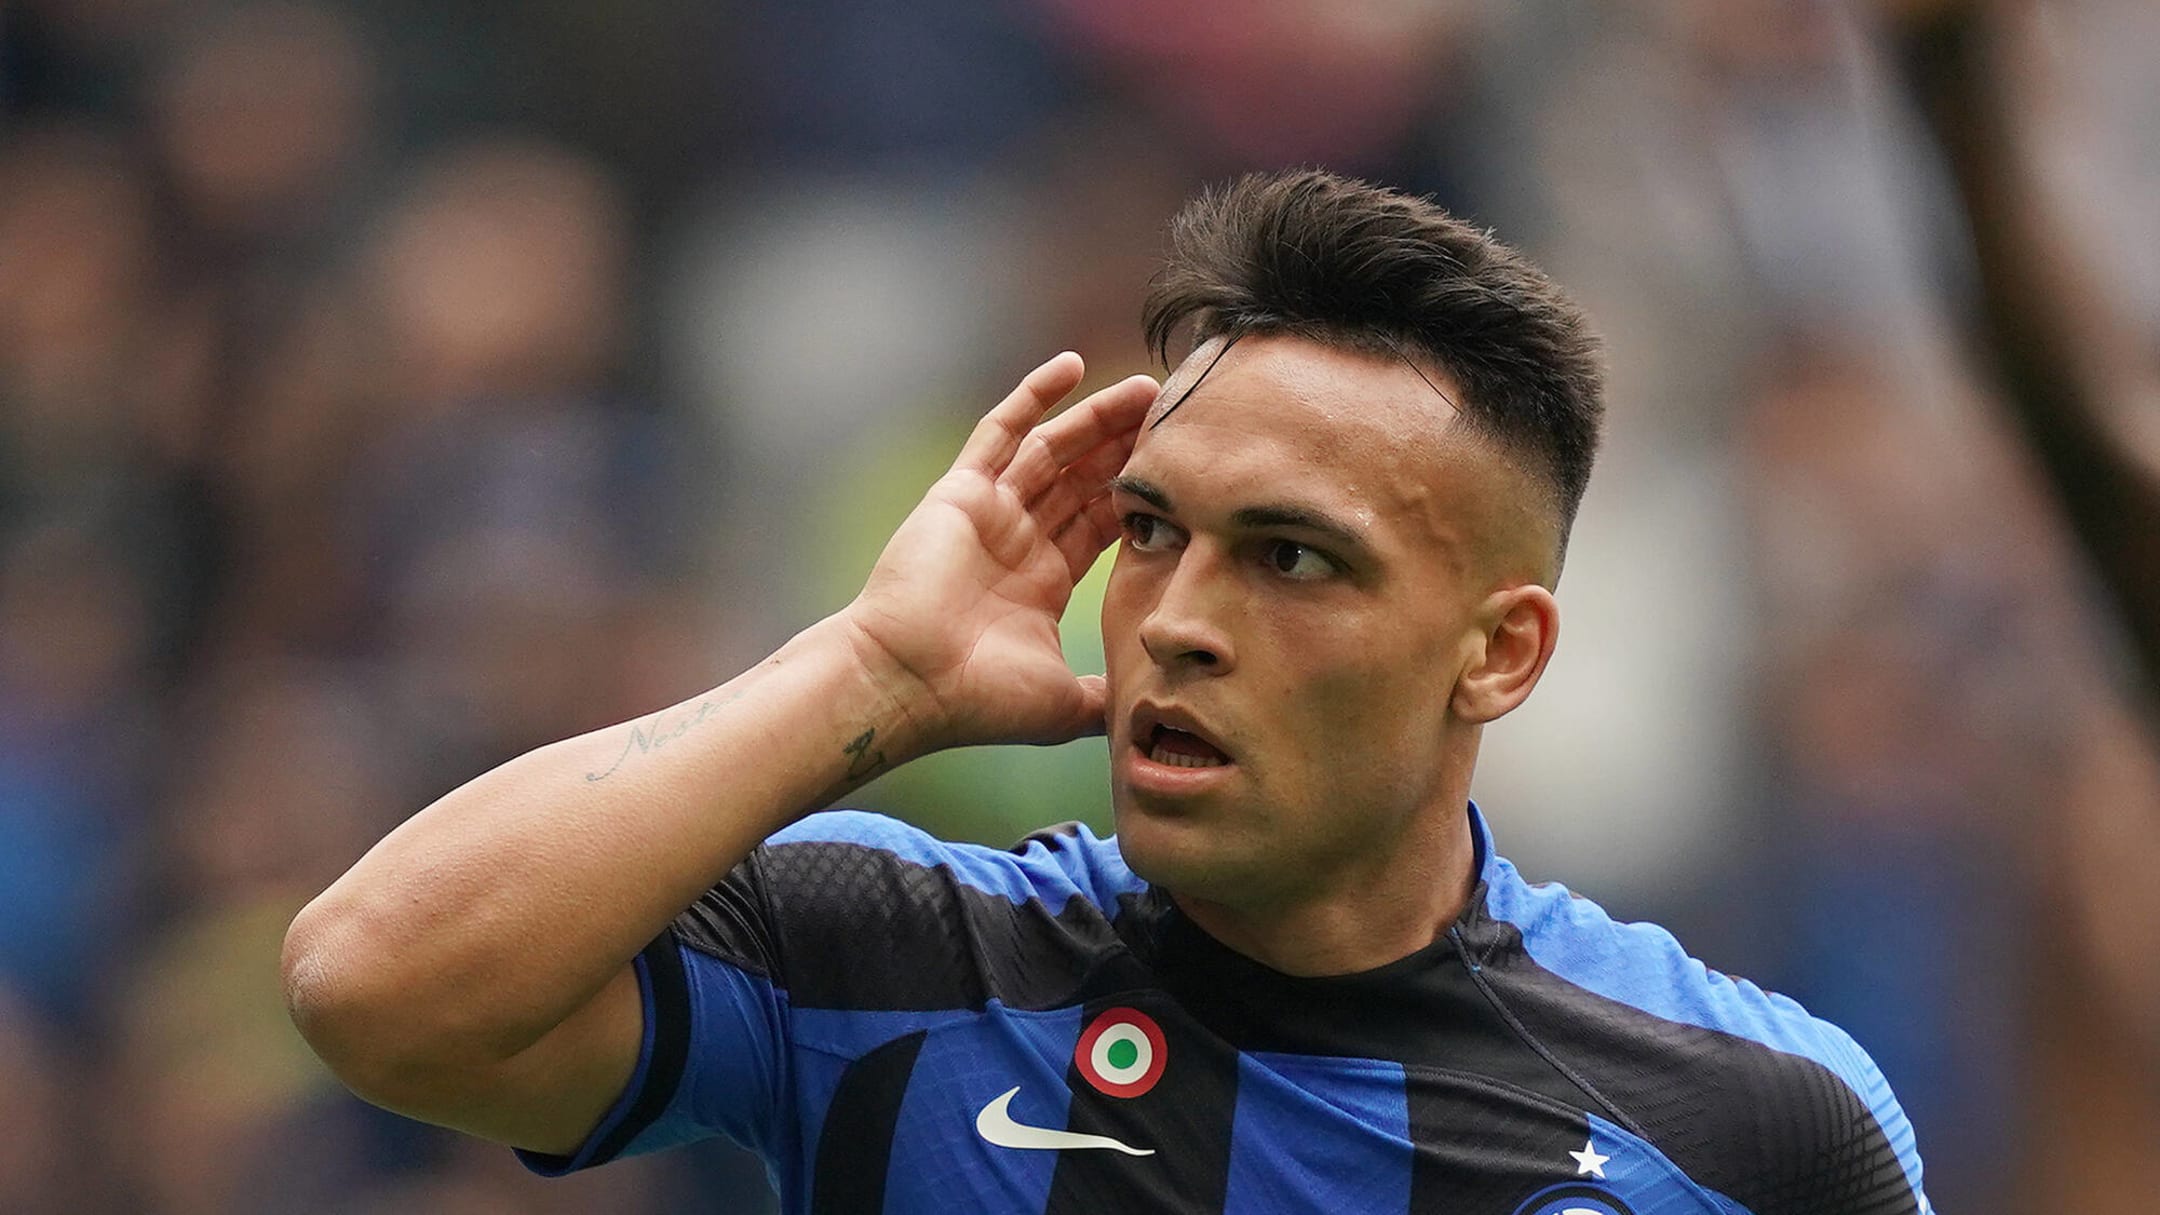 Lautaro Martinez could sign for Spanish giants who are looking at replacing ageing striker